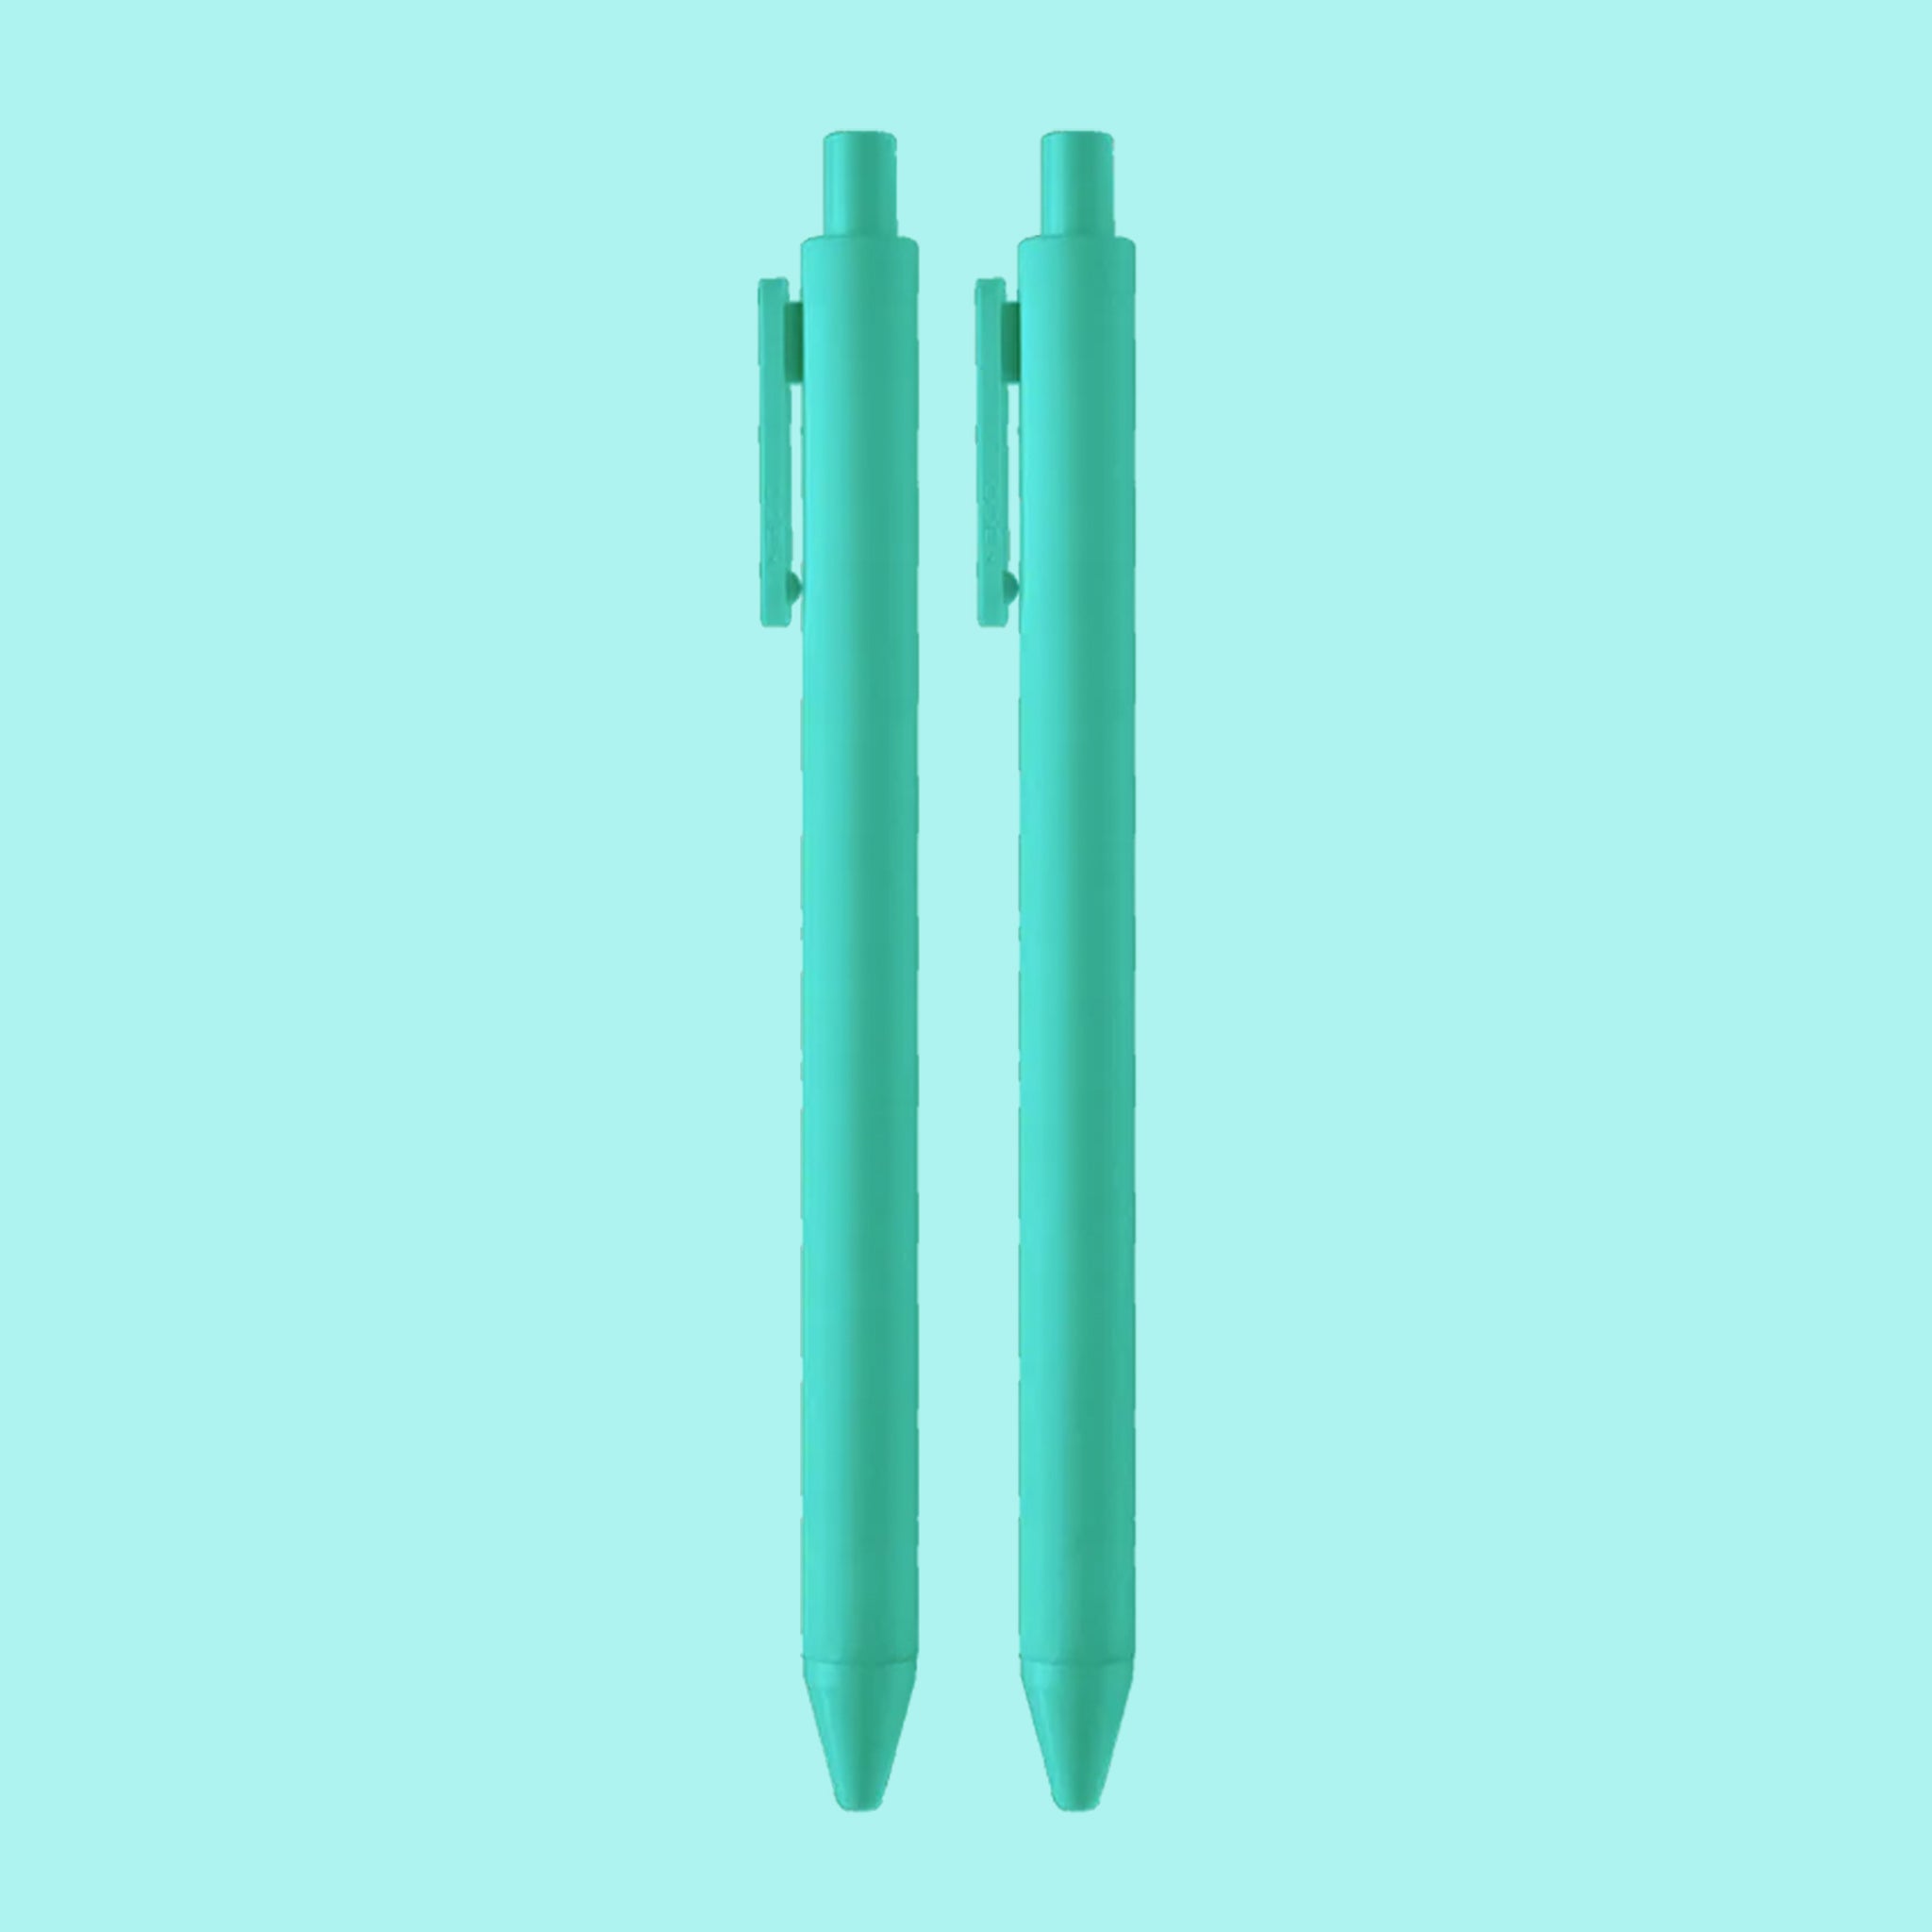 On a teal background is a teal pair of ballpoint pens. 